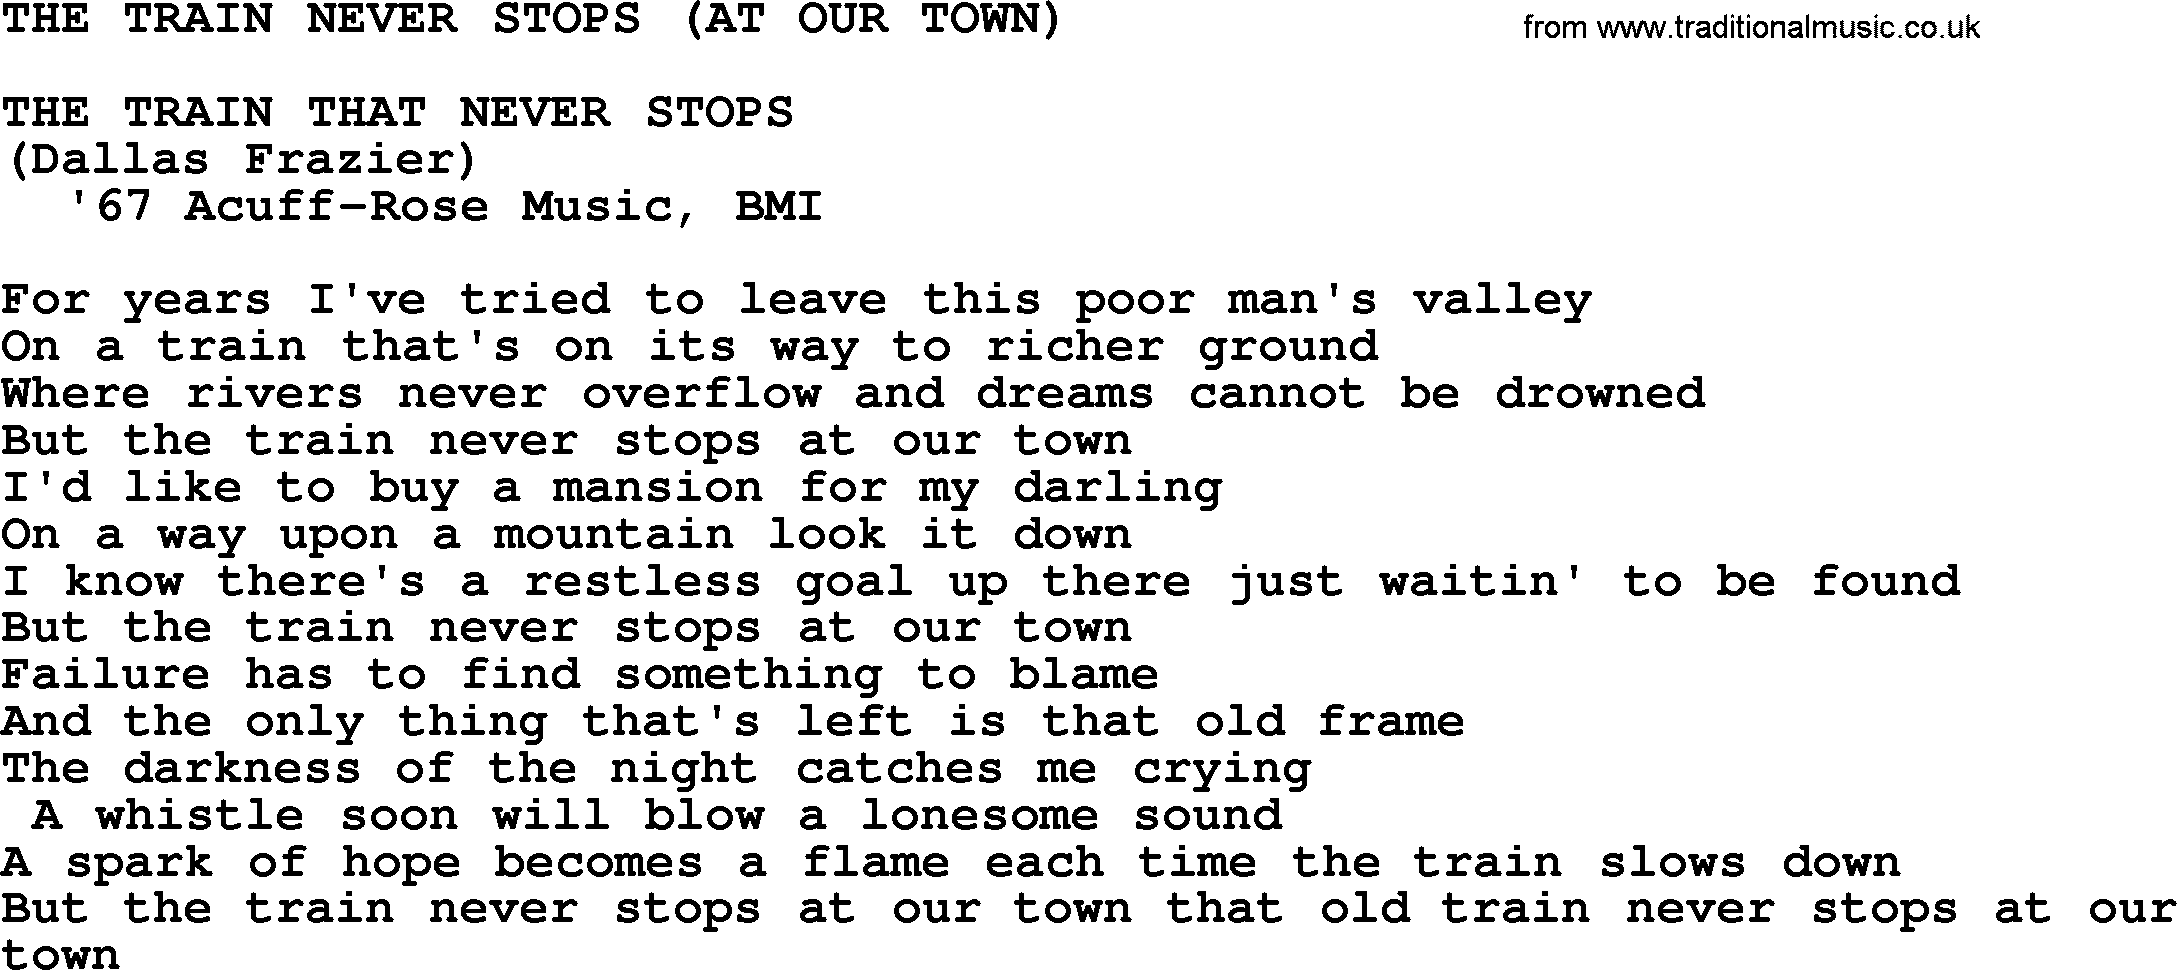 Merle Haggard song: The Train Never Stops At Our Town, lyrics.